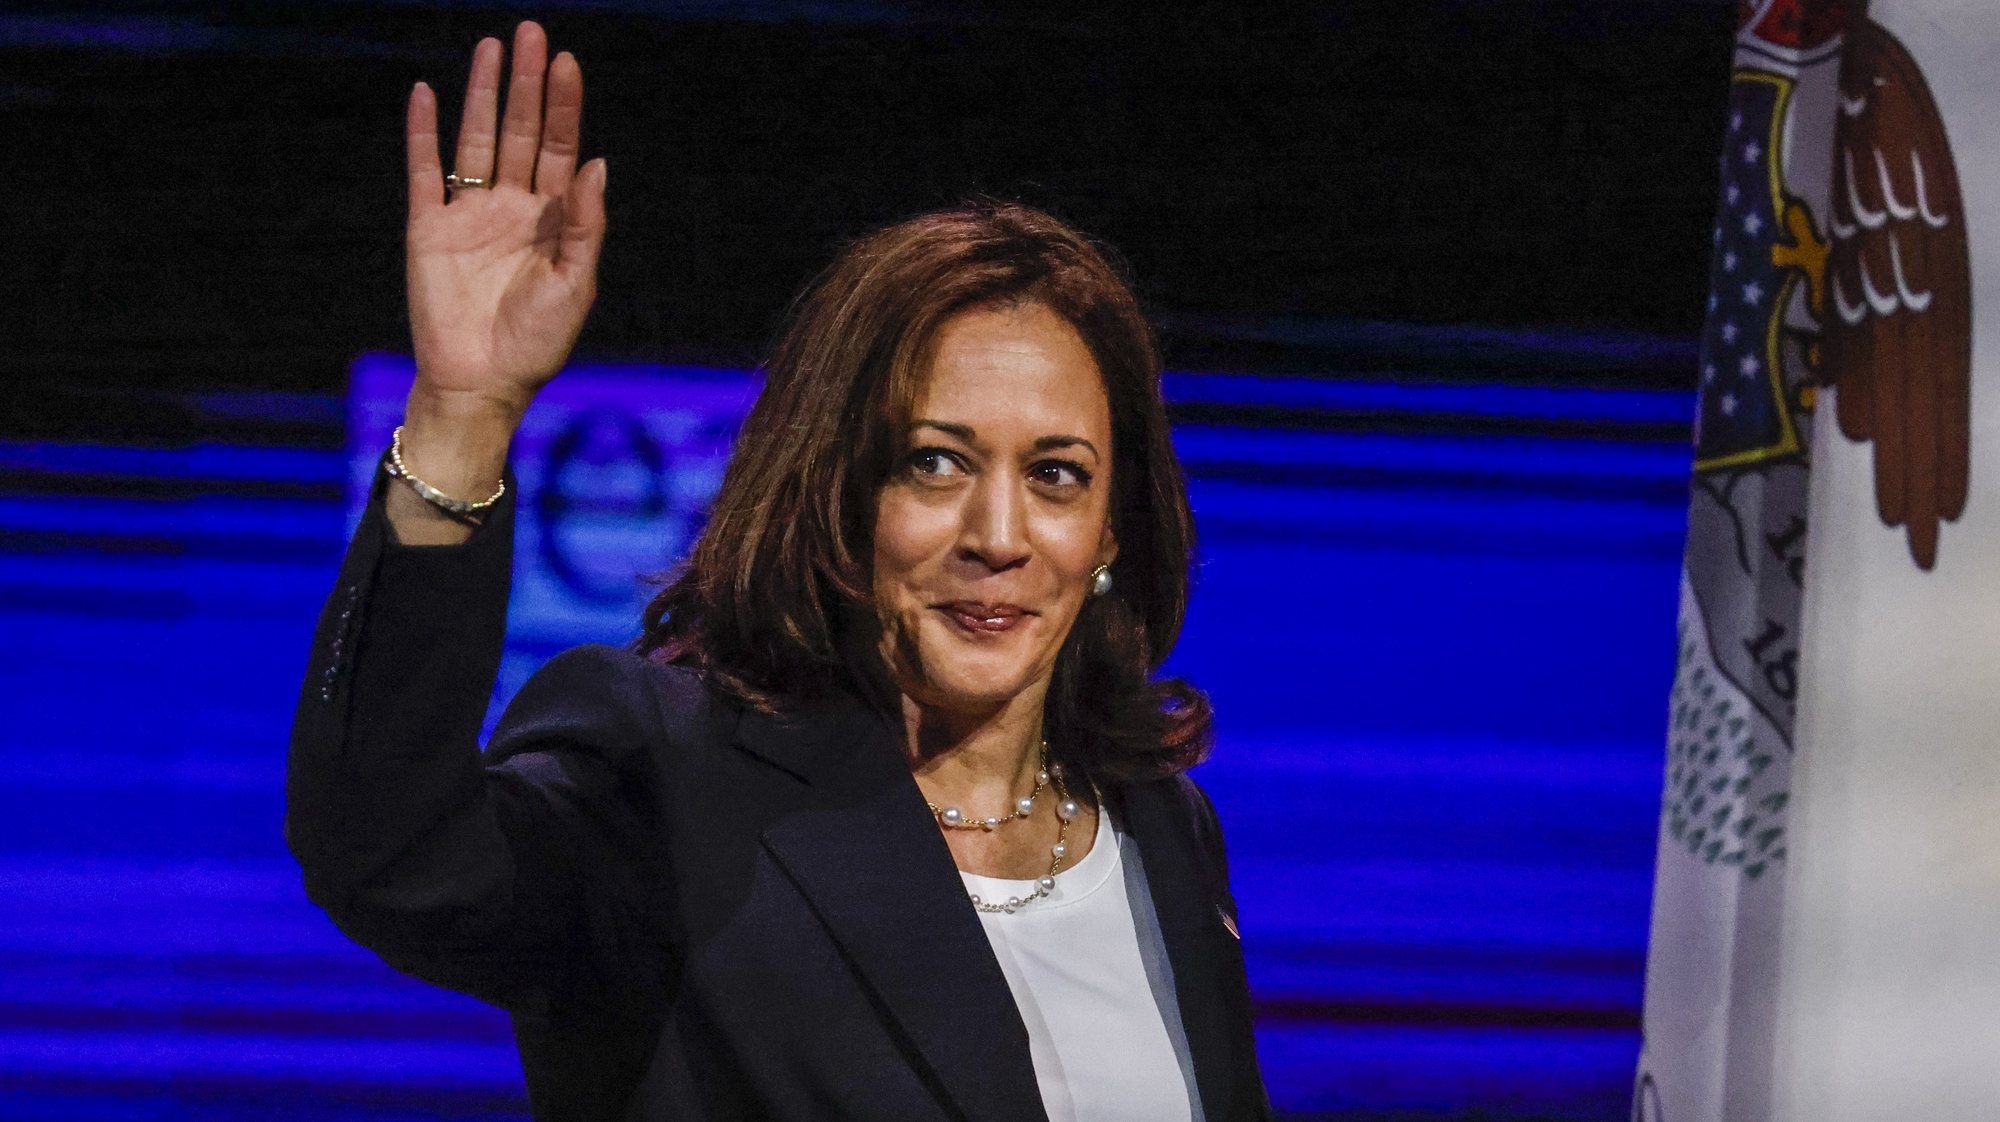 epa10054105 US Vice President Kamala Harris waves as she departs after speaking to the National Education Association 2022 Annual Meeting and Representatives Assembly in Chicago, Illinois, USA, 05 July 2022. Thousands of education professionals are meeting at the McCormick Place Convention Center.  EPA/TANNEN MAURY / POOL